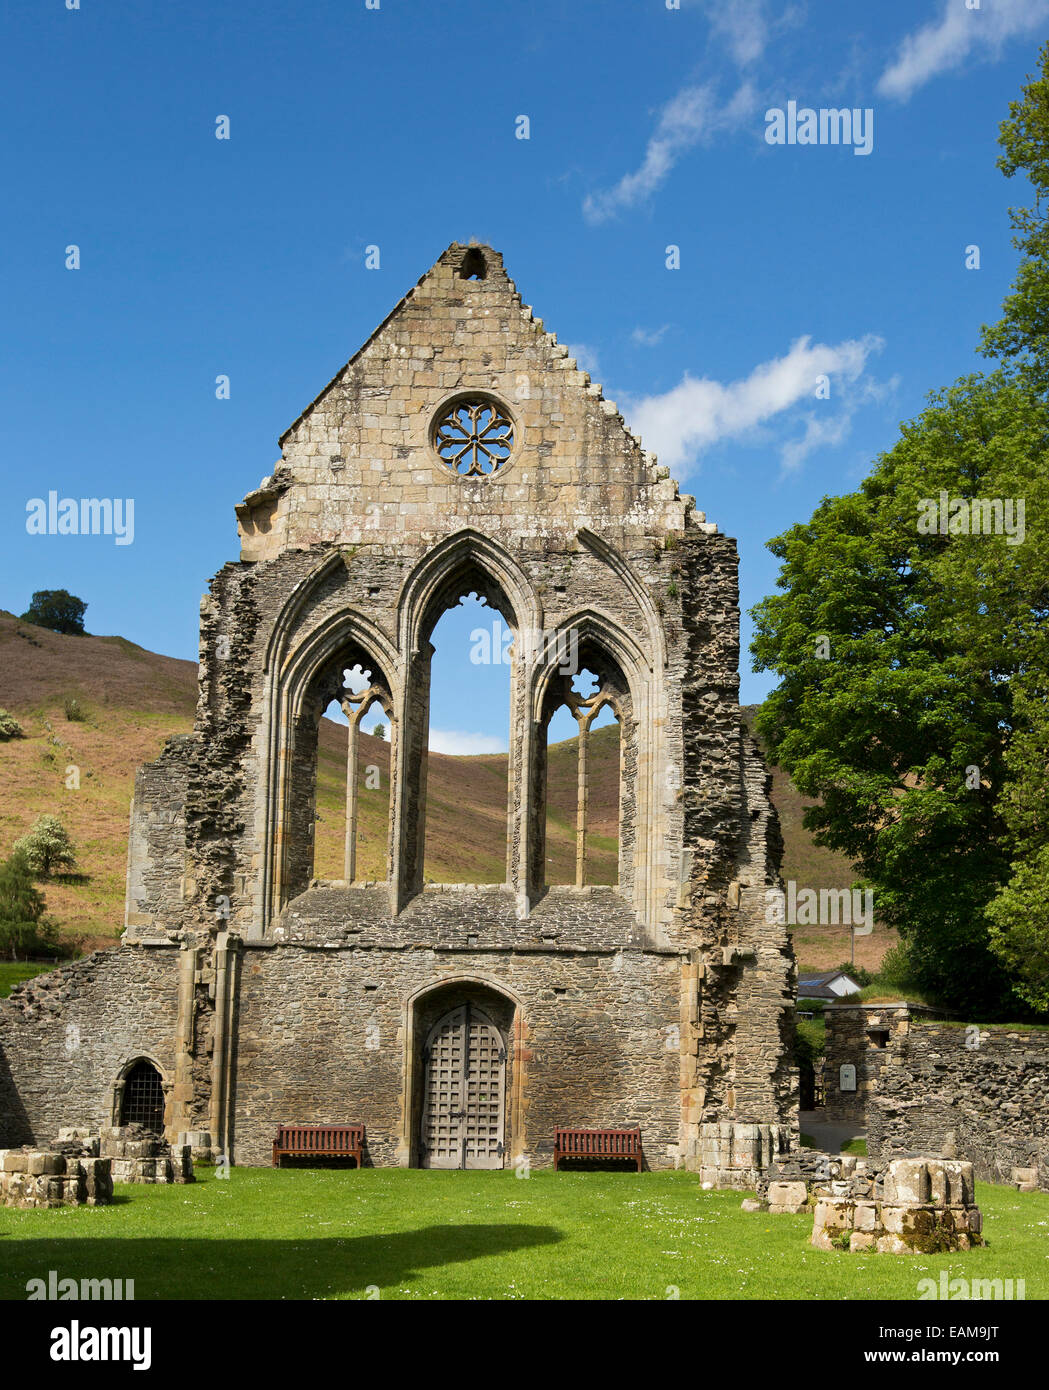 Ornate facade of 13th century Valle Crusis abbey ruins at foot of grassy hill and under blue sky  near Llantysilio in Wales Stock Photo